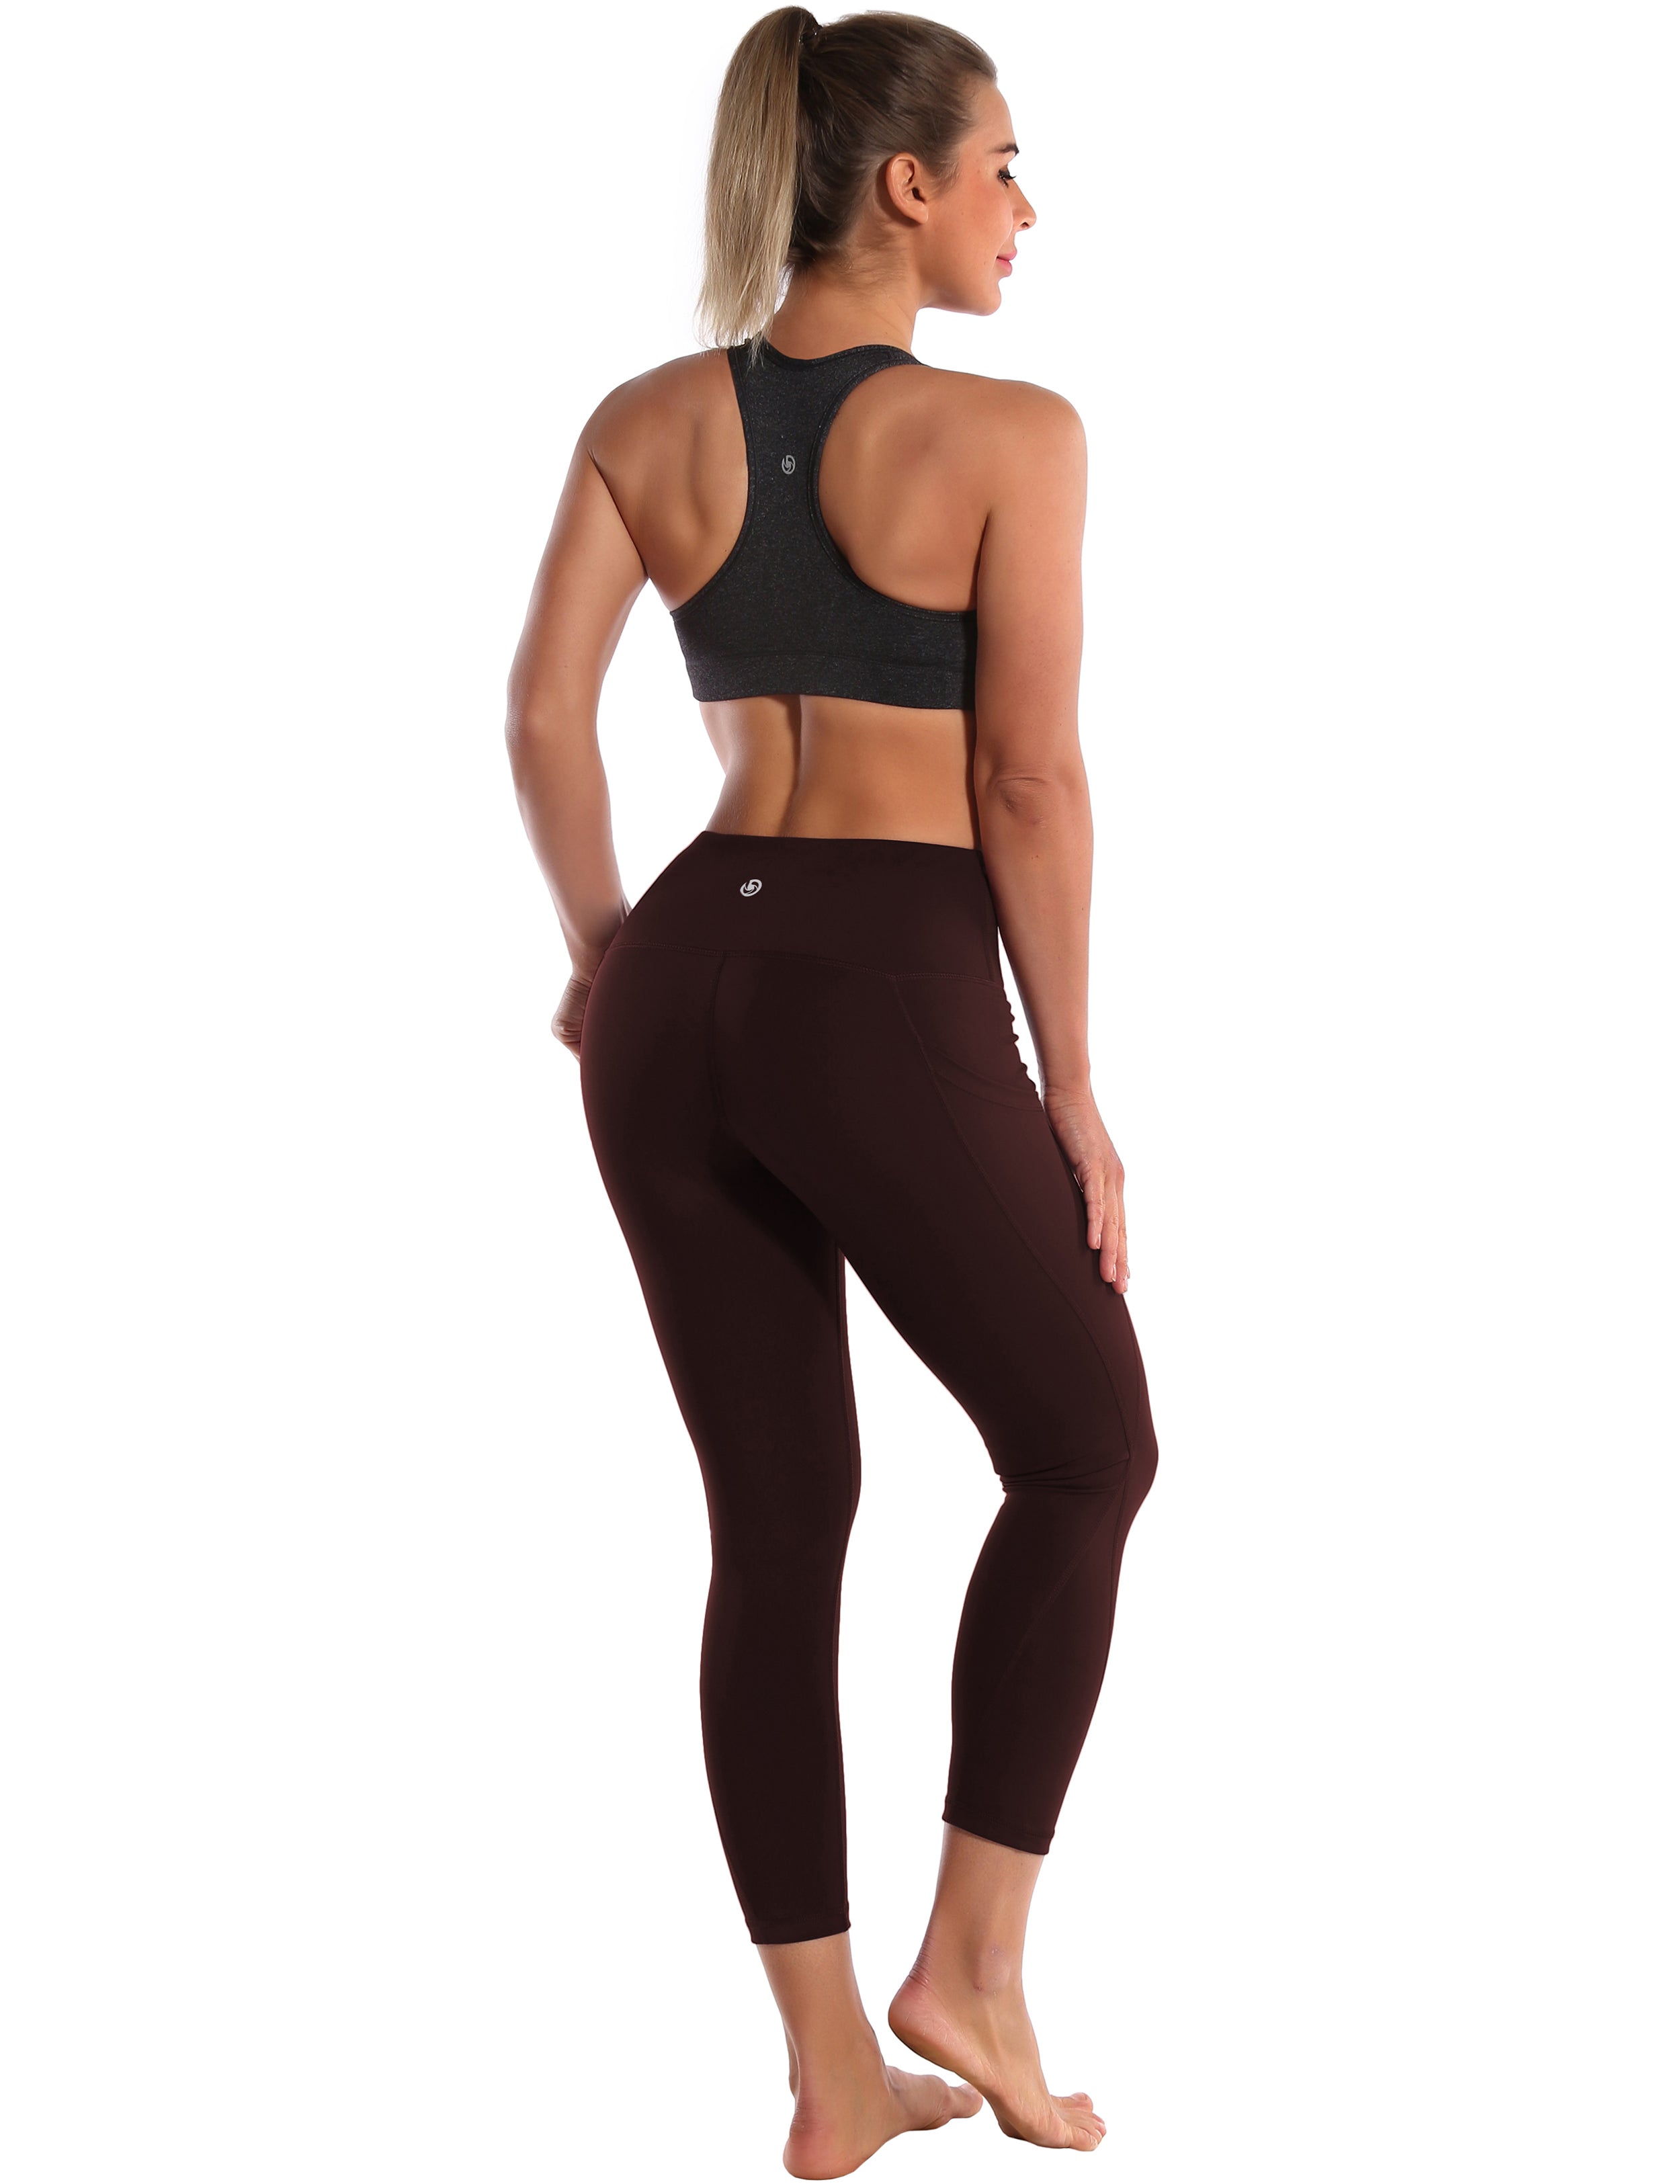 22" High Waist Side Pockets Capris mahoganymaroon 75%Nylon/25%Spandex Fabric doesn't attract lint easily 4-way stretch No see-through Moisture-wicking Tummy control Inner pocket